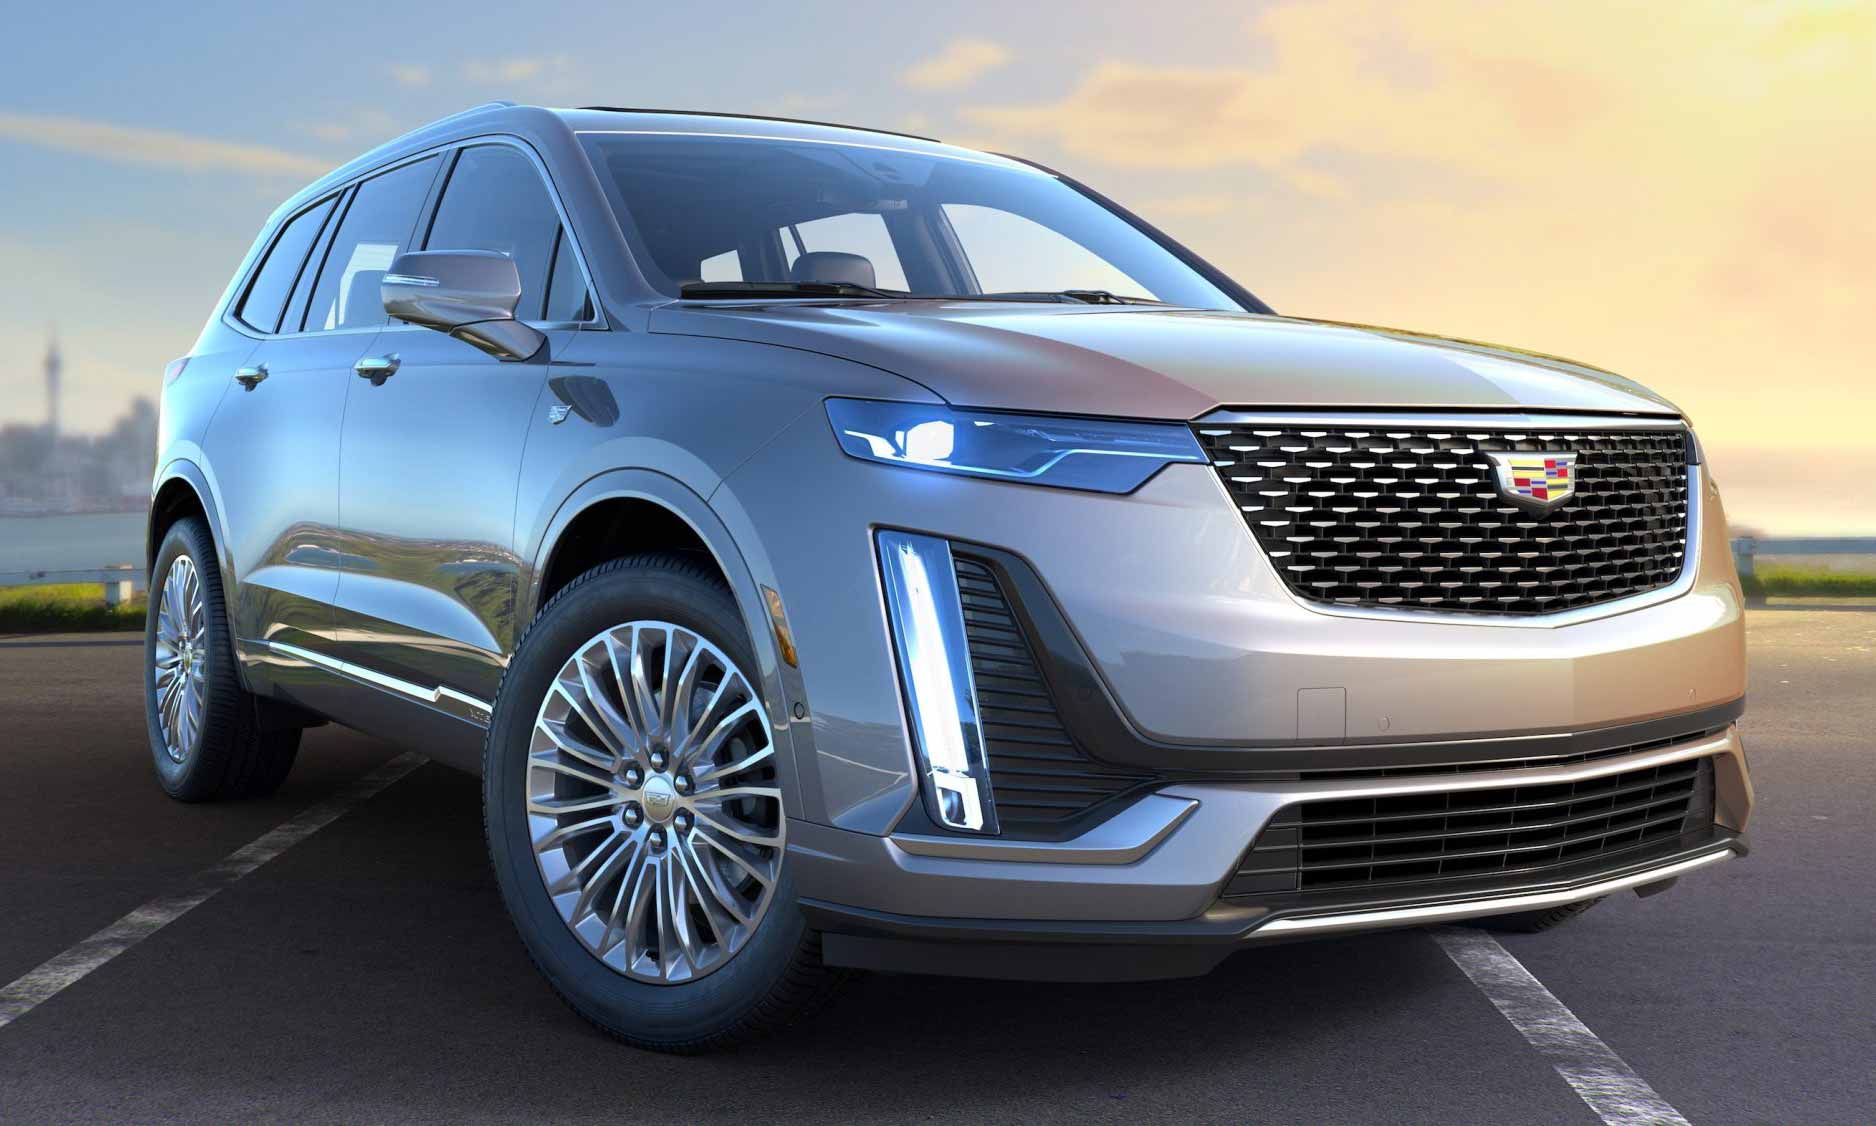 The virtual Cadillac is indistinguishable from a real one